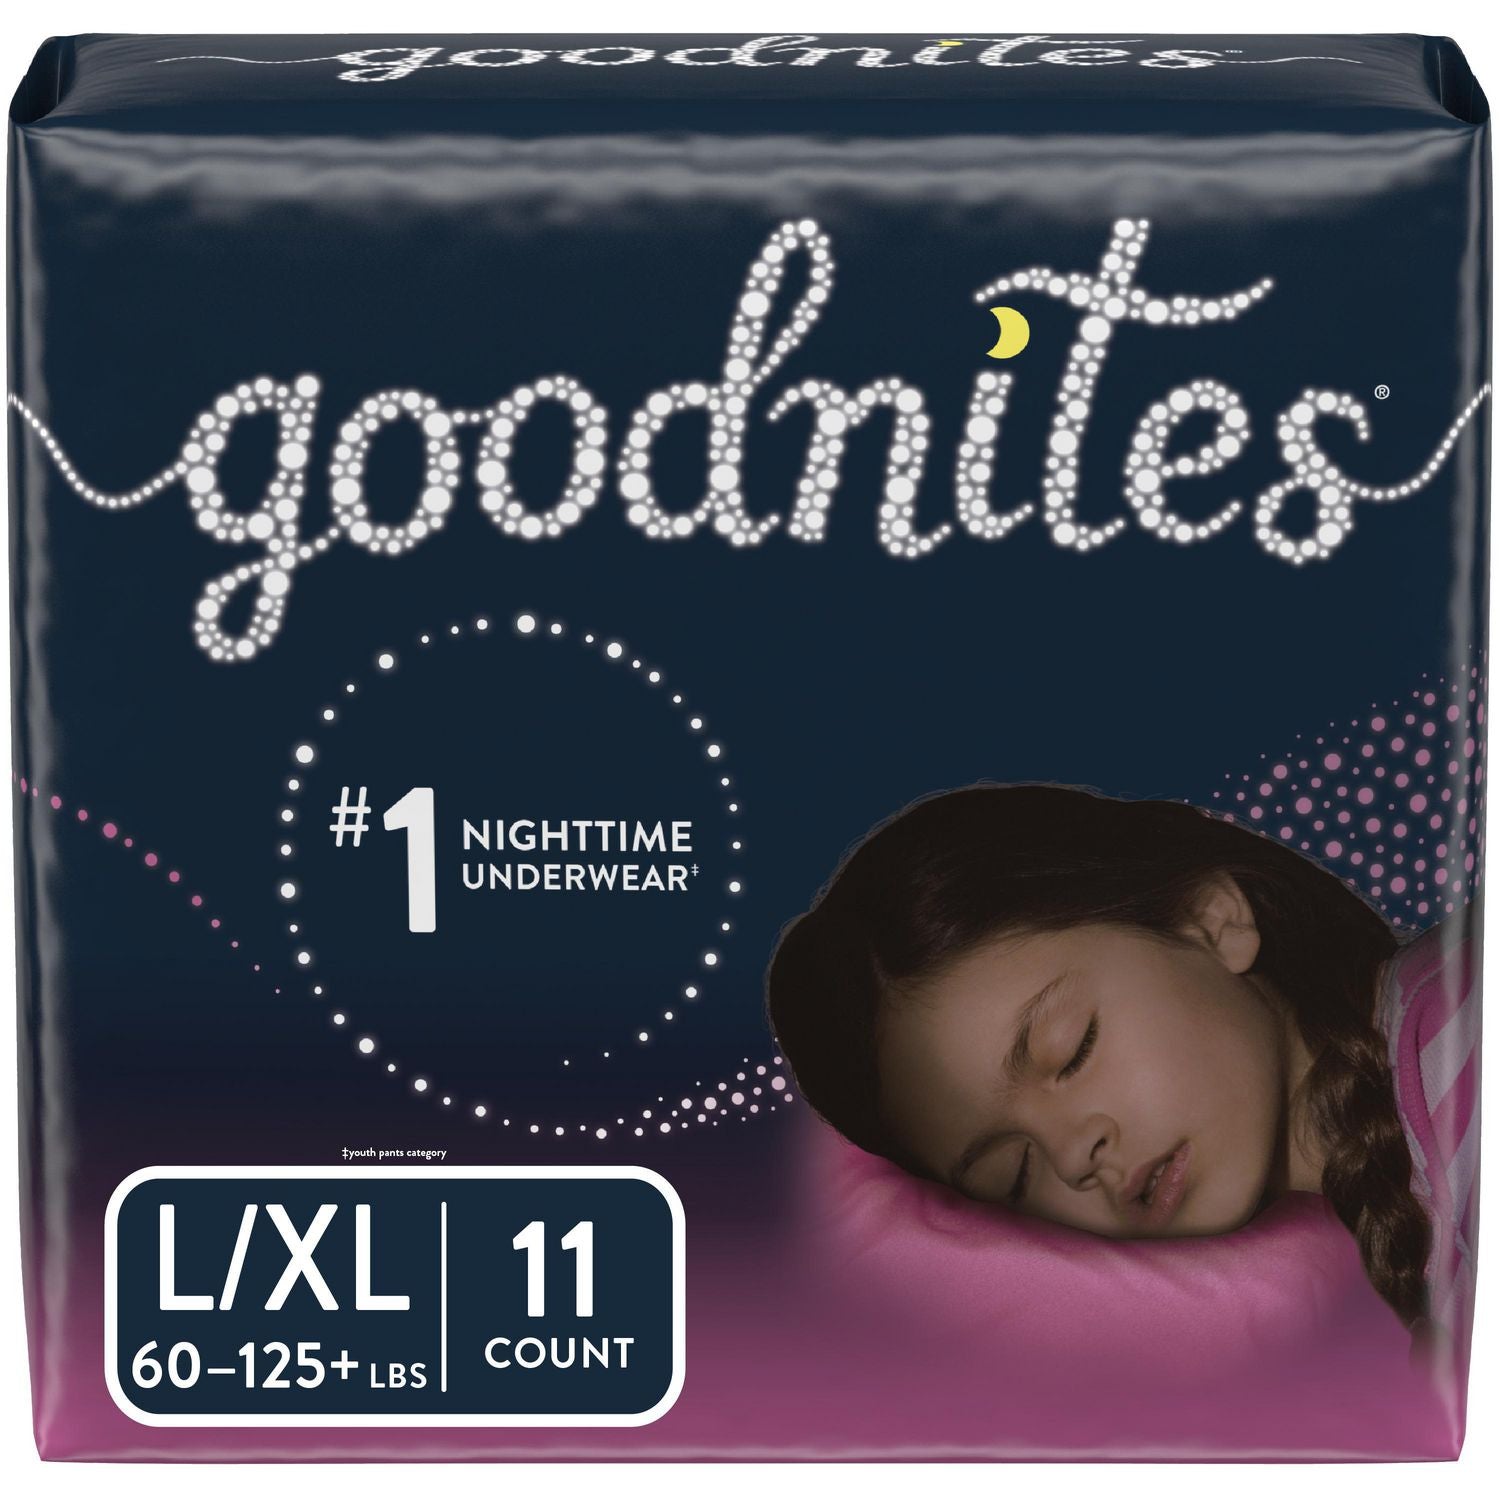 GoodNites Nighttime Underwear for Girls, Large-Extra Large - 11 count